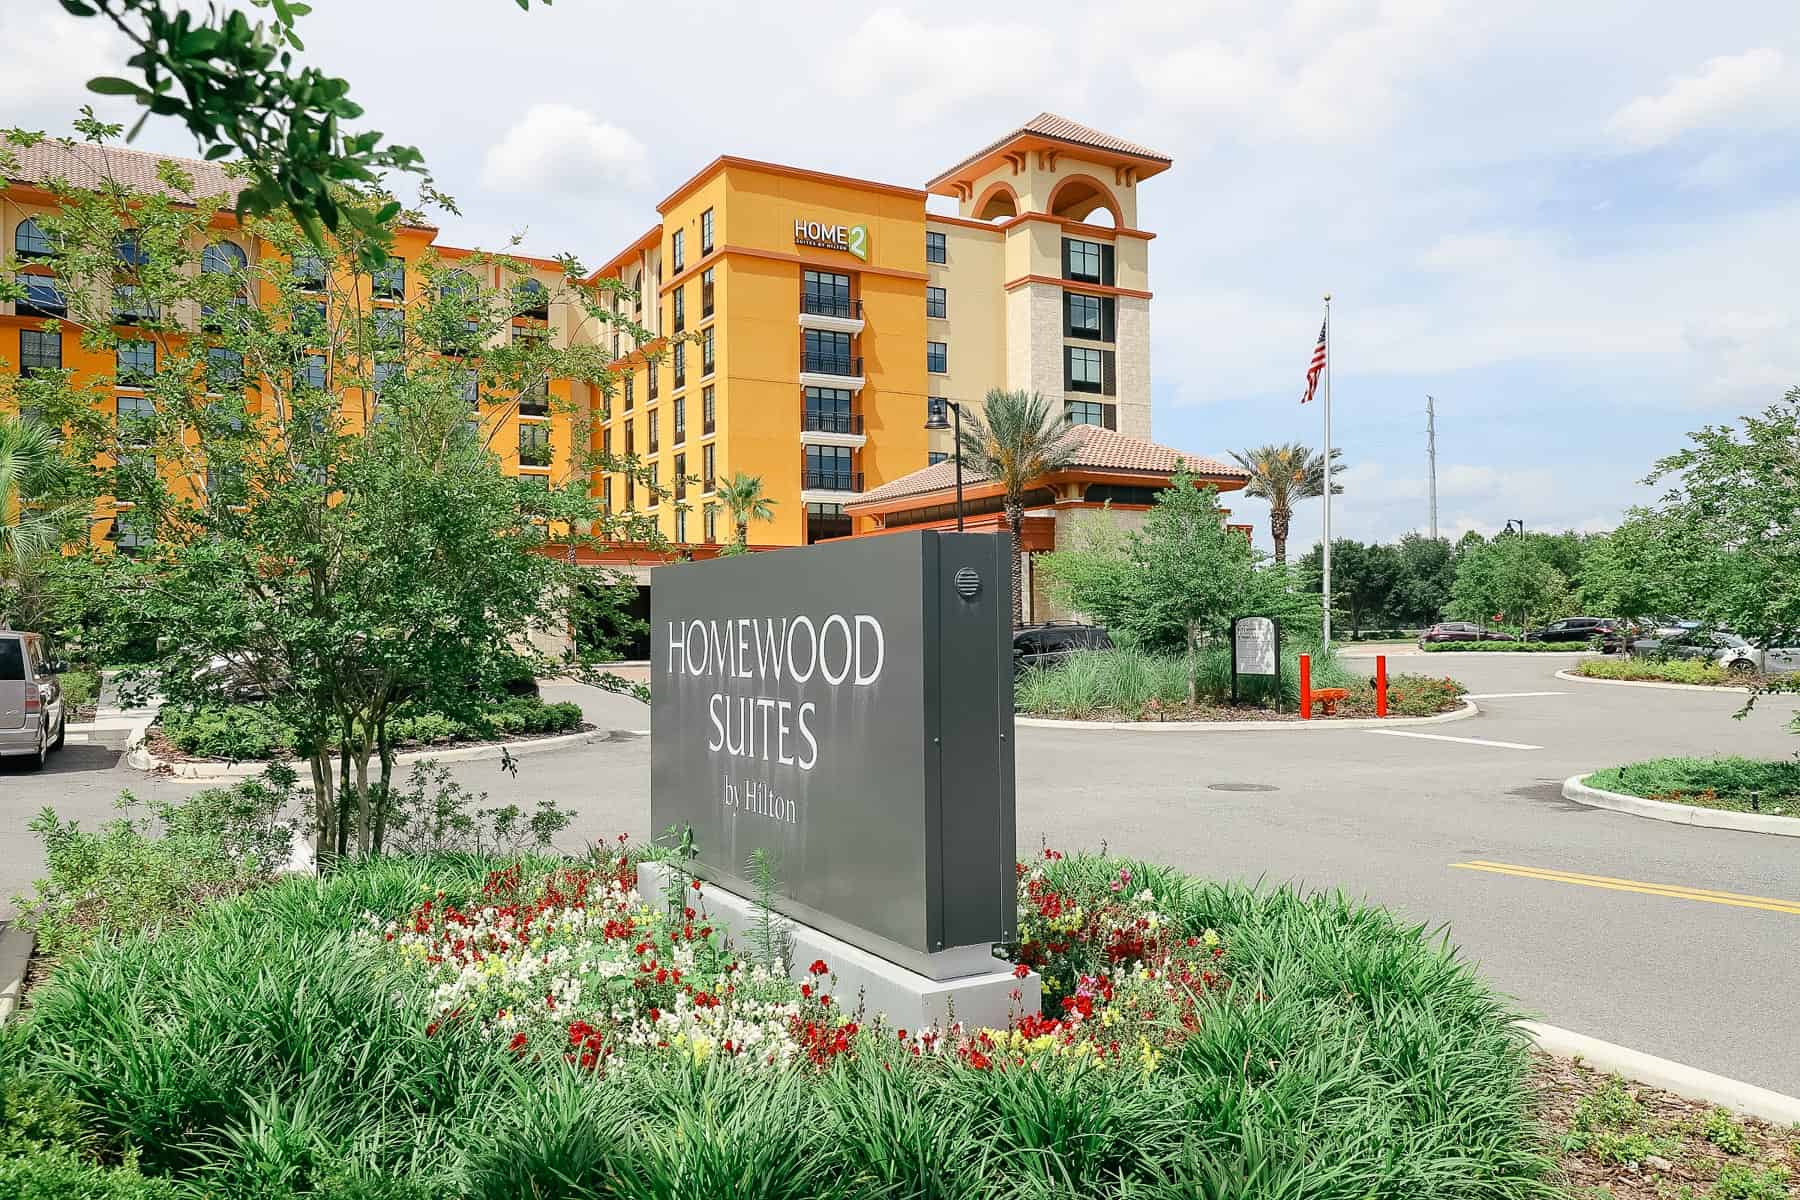 The Homewood Suites is one of our top options for hotels close to Disney World. 